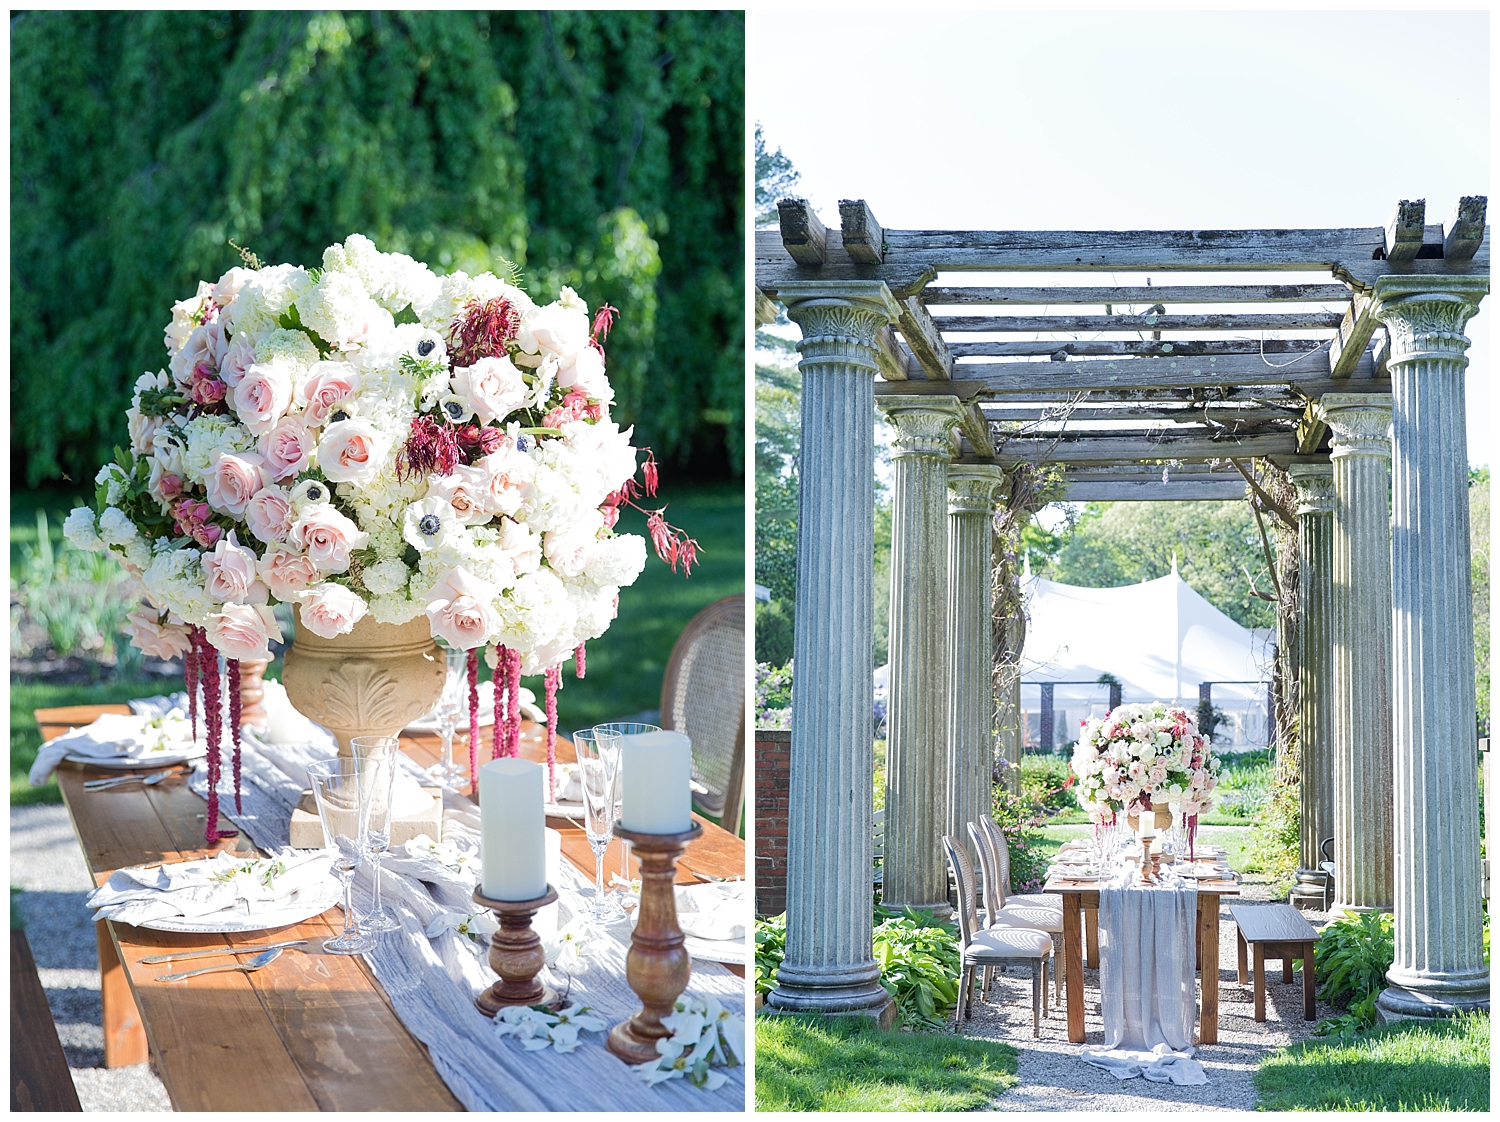 Glen Magna Farms Danvers, Massachusetts wedding inspiration shoot with photography by halie. Rentlas from PEAK Events and florals by Intrigue Designs.